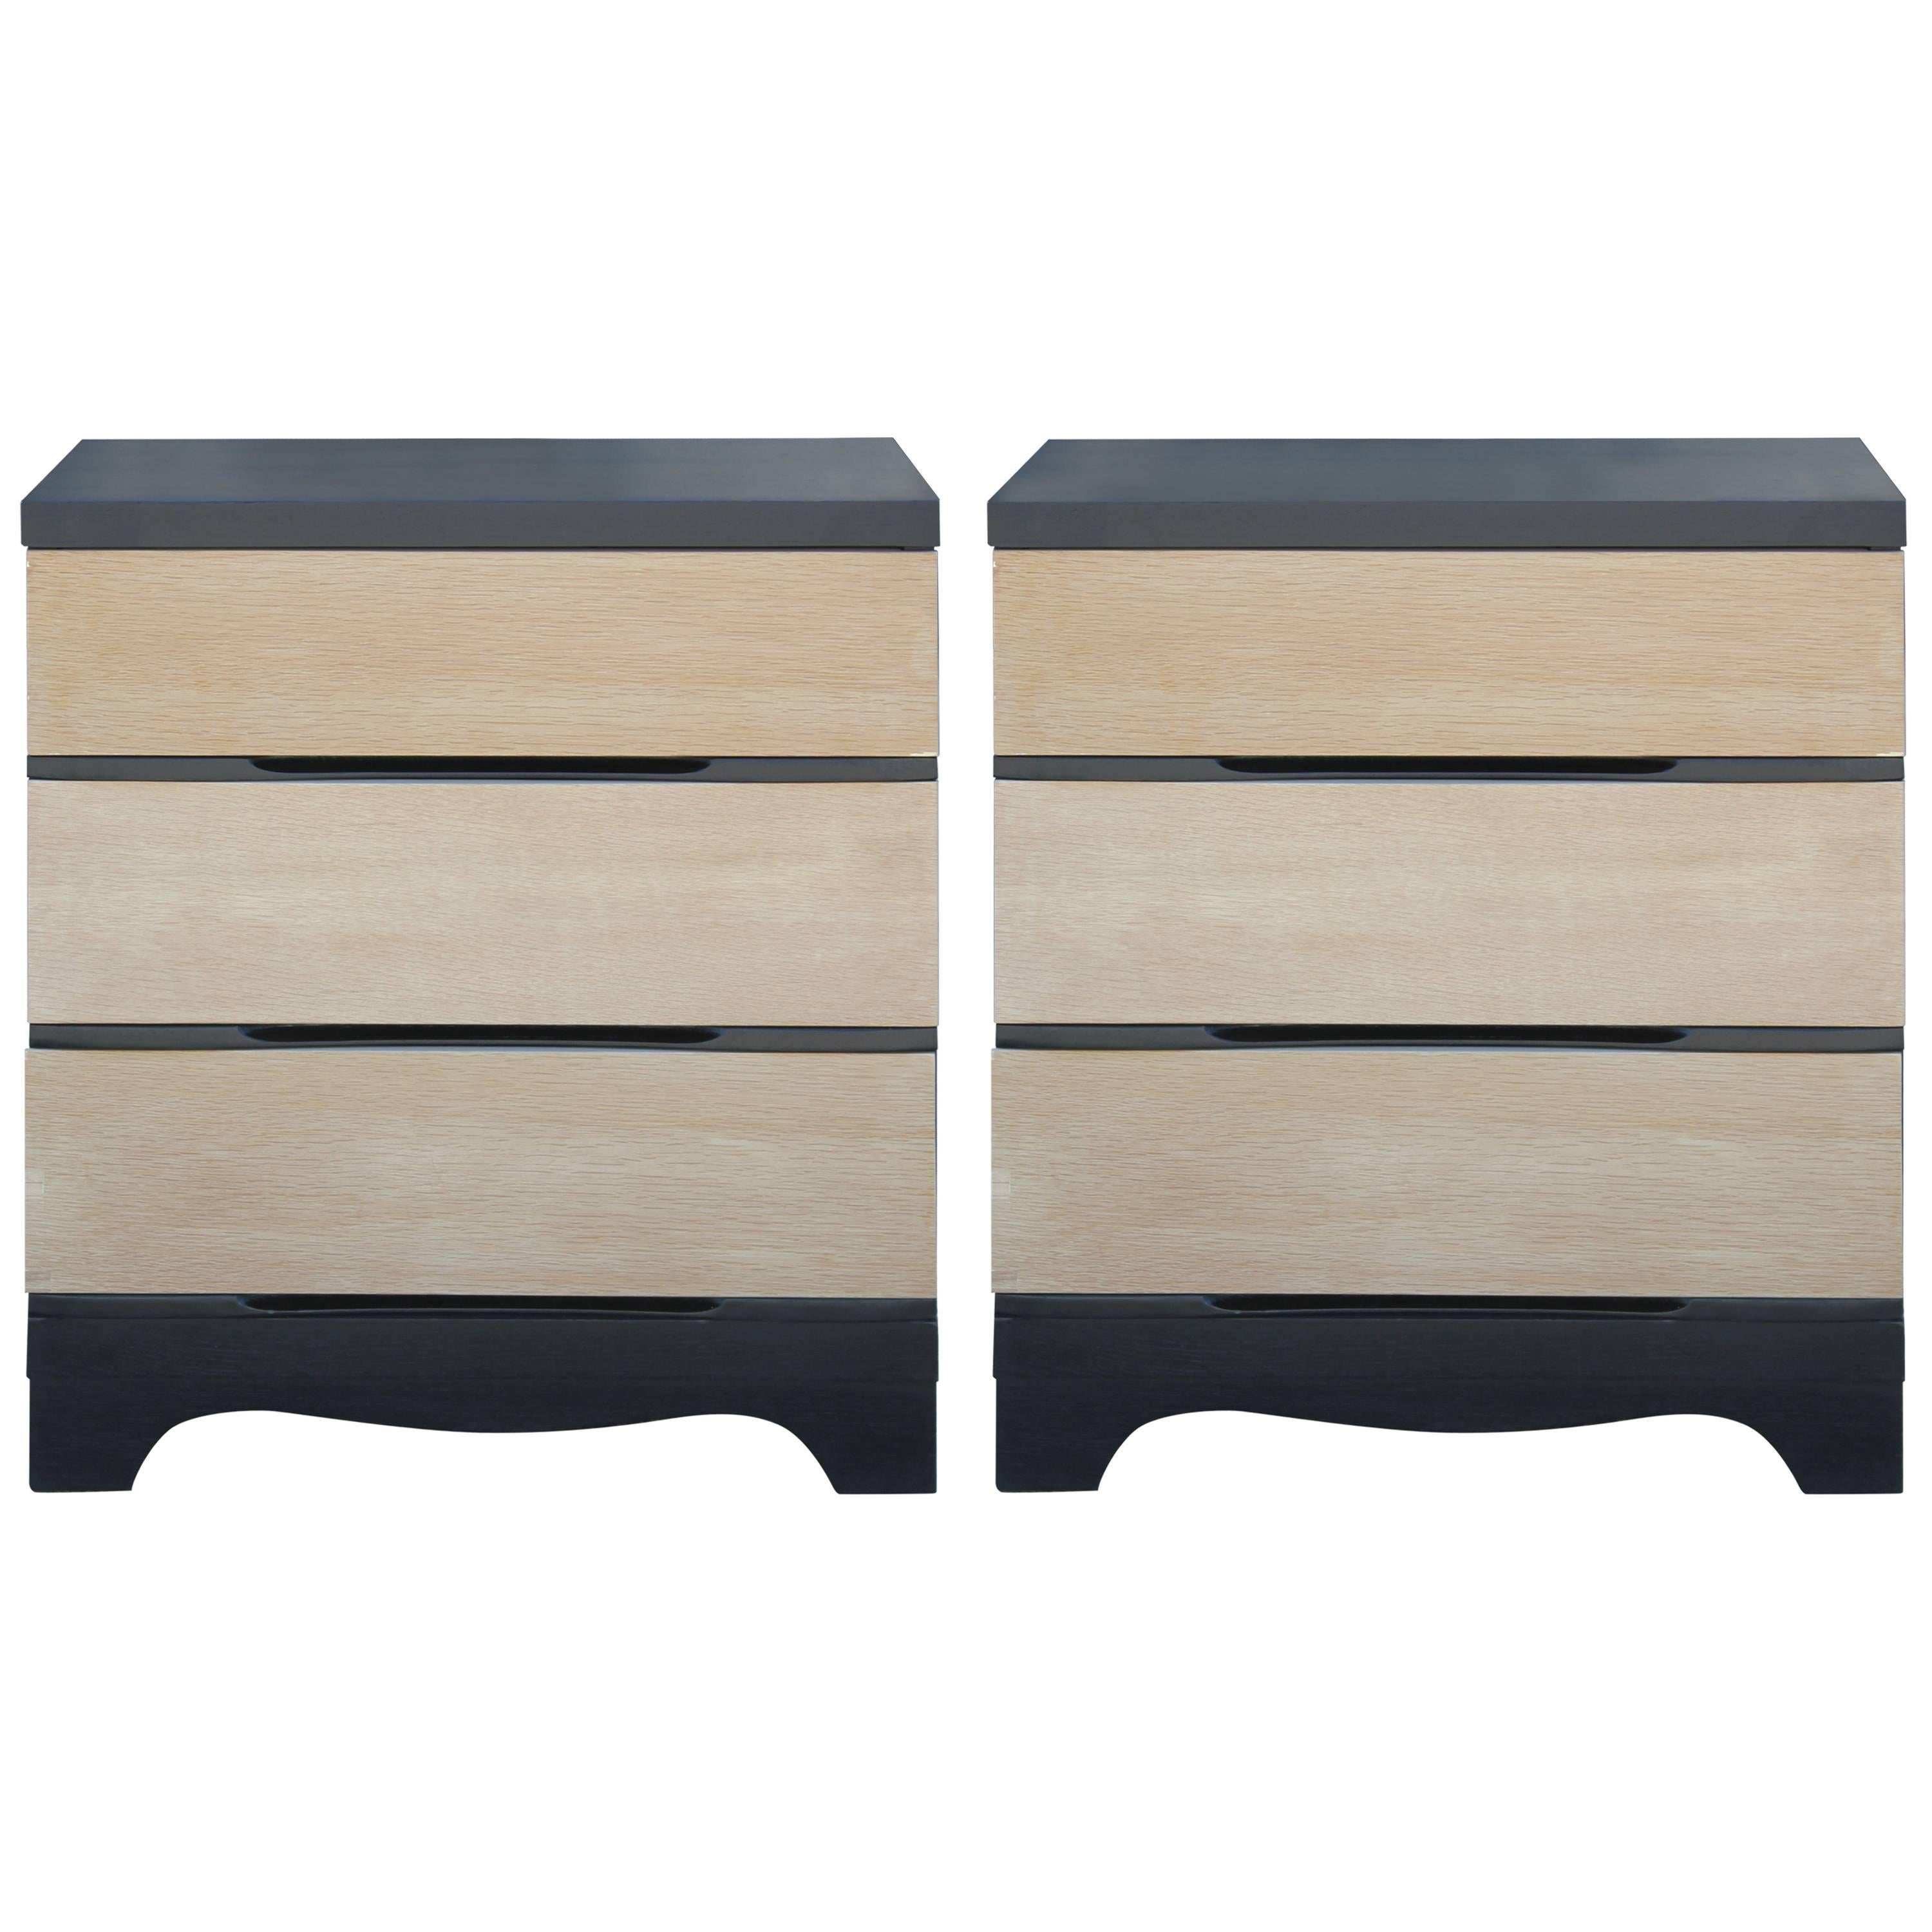 Pair of Modern Simple Three Drawer Two-Tone Bachelor's Chests or Nightstands